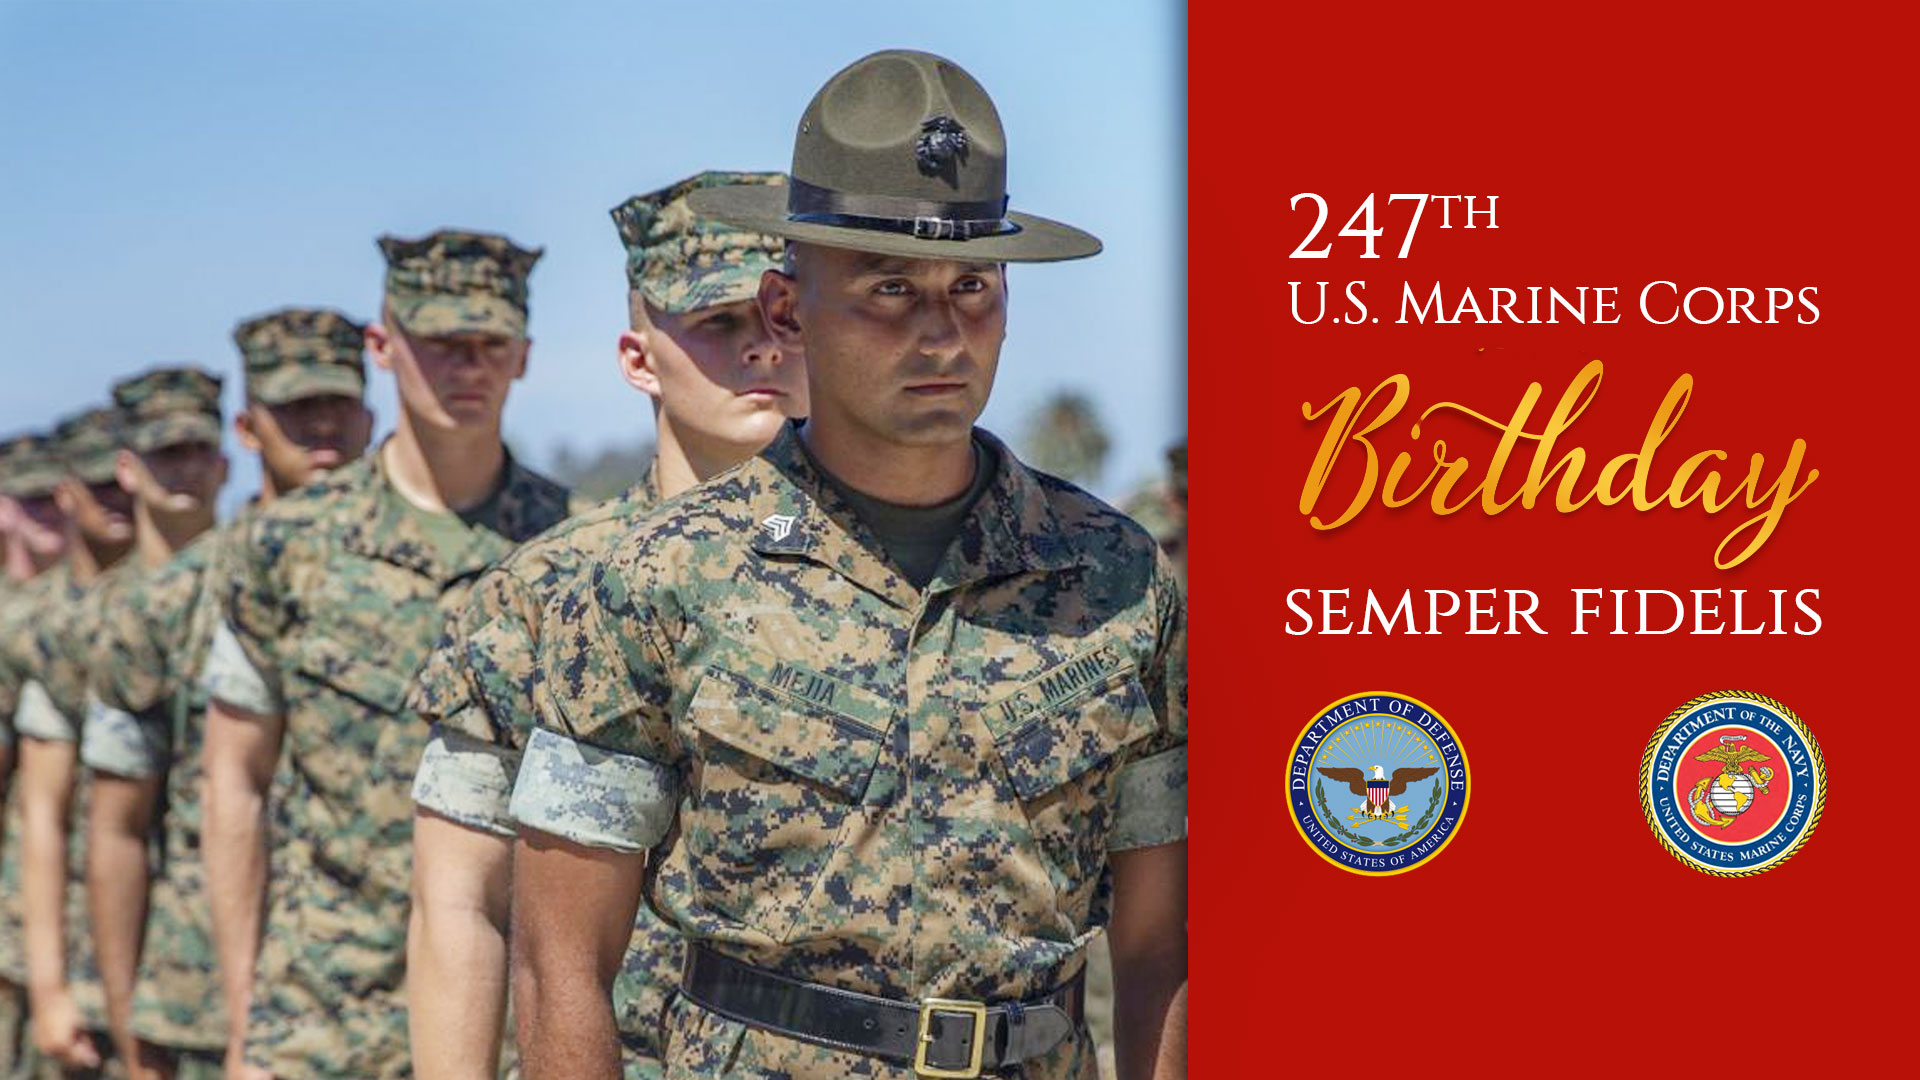 Department of Defense on X: "First to fight. Join us in celebrating 247 years of the @USMC. #SemperFidelis https://t.co/5pUQk6VAPe" / X